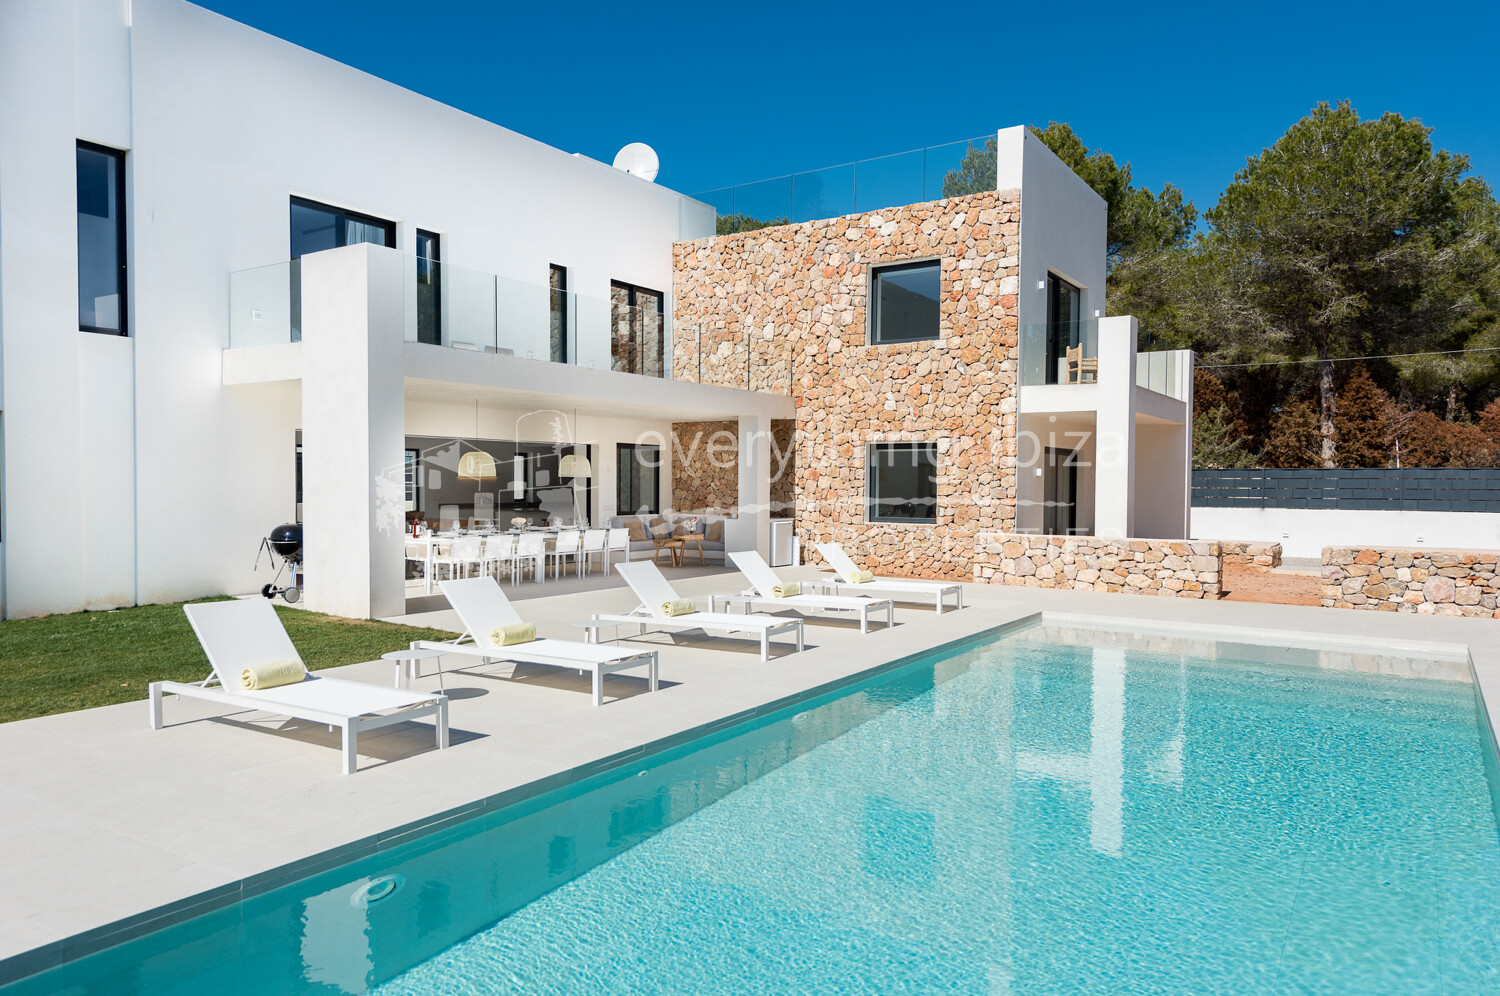 Stunning New Modern Villa Close to the Coastline and Nearby Beaches, ref. 1719, for sale in Ibiza by everything ibiza Properties